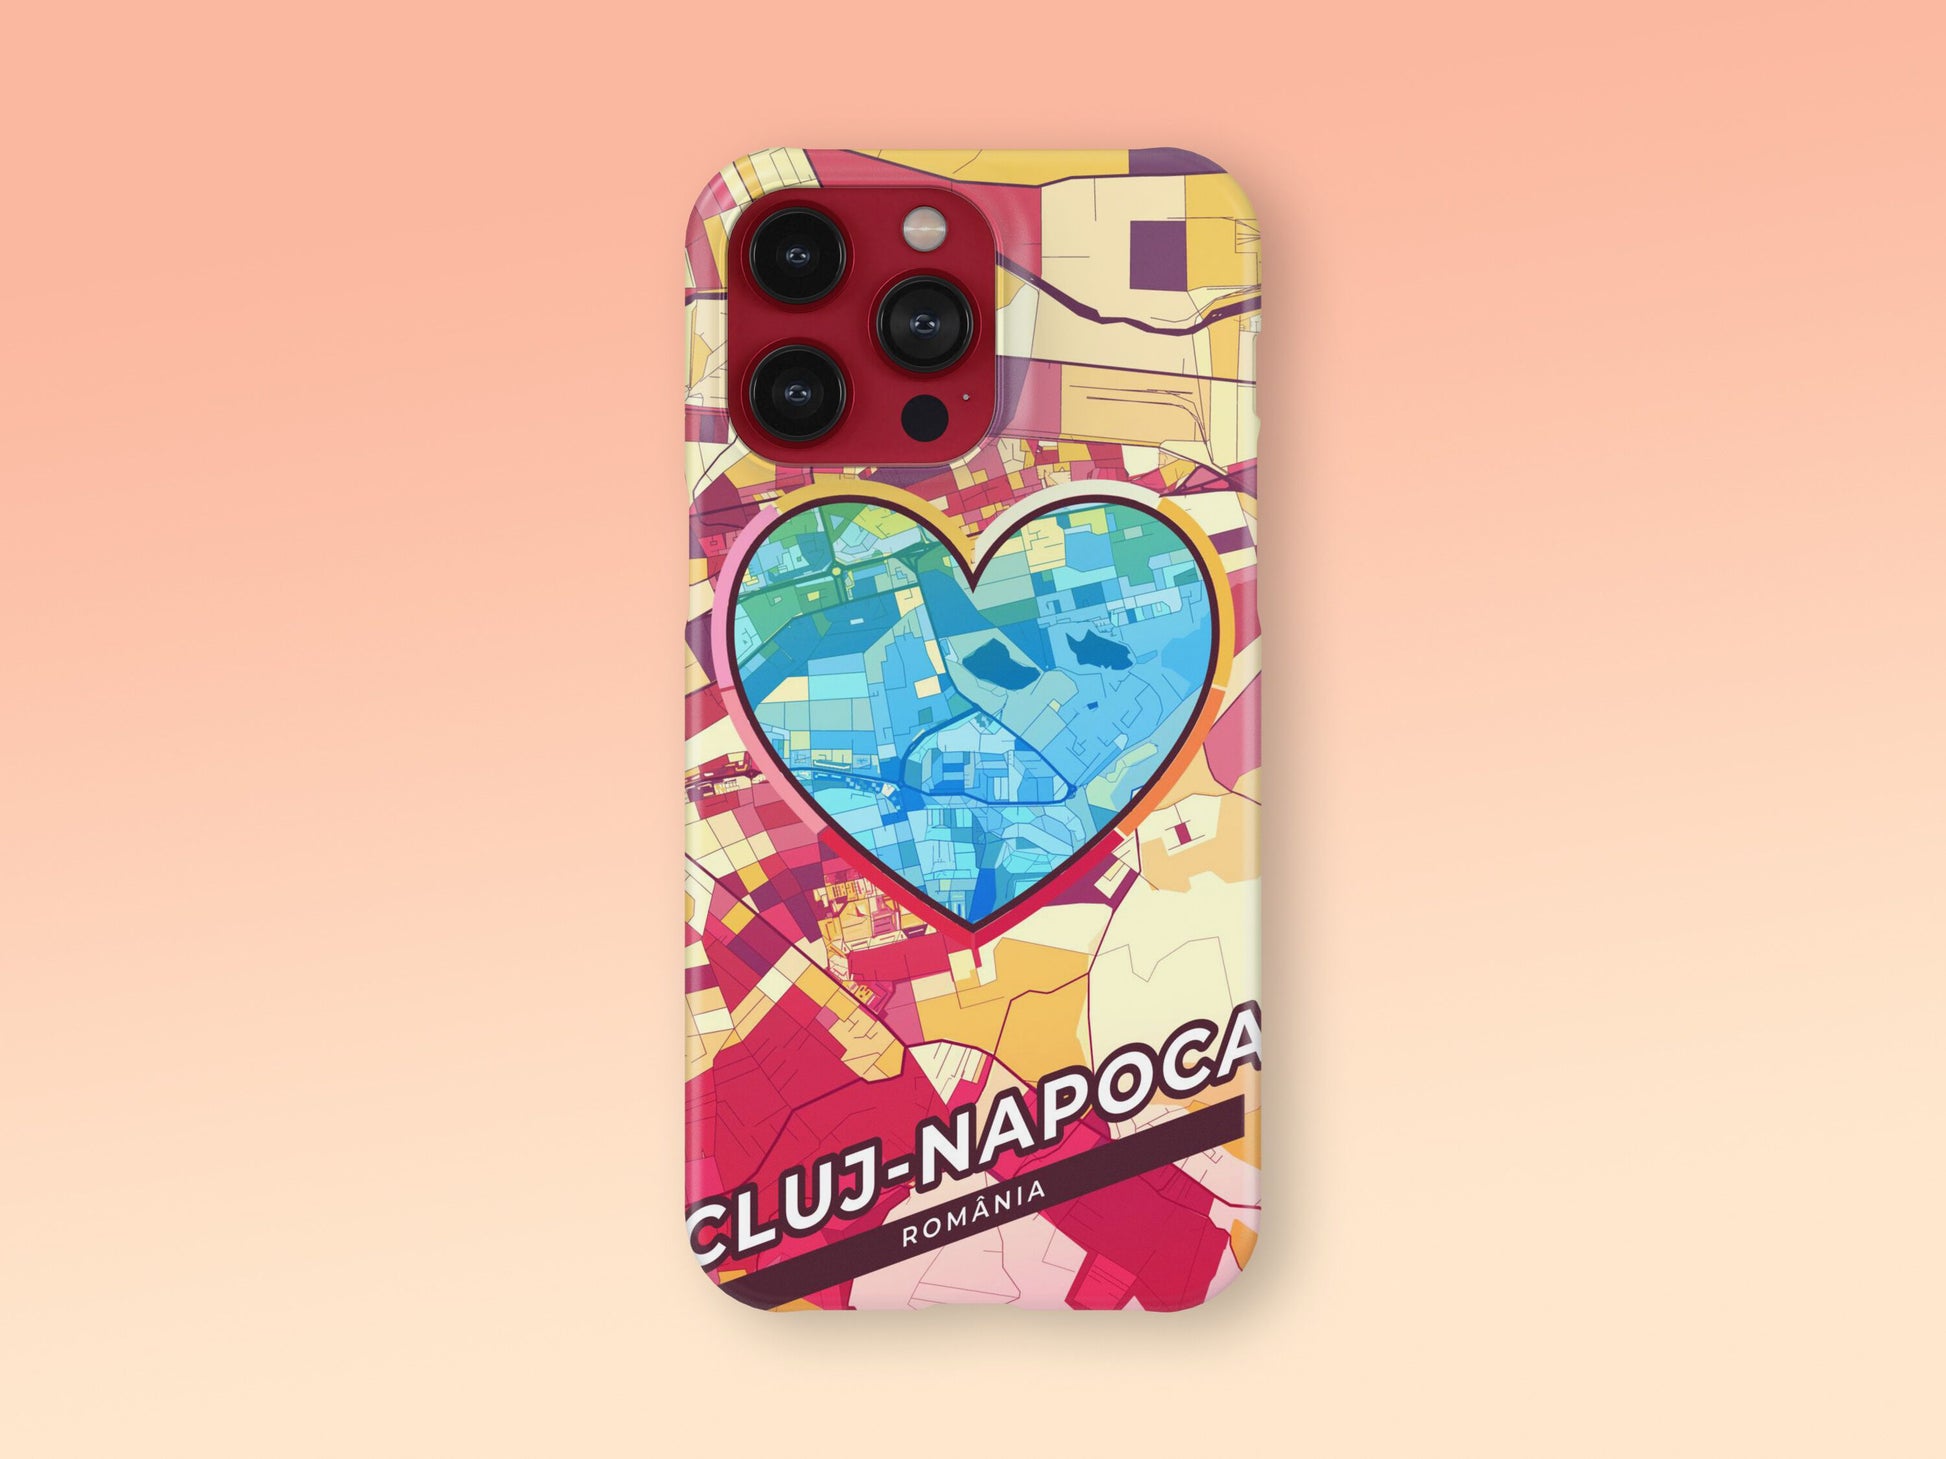 Cluj-Napoca Romania slim phone case with colorful icon. Birthday, wedding or housewarming gift. Couple match cases. 2